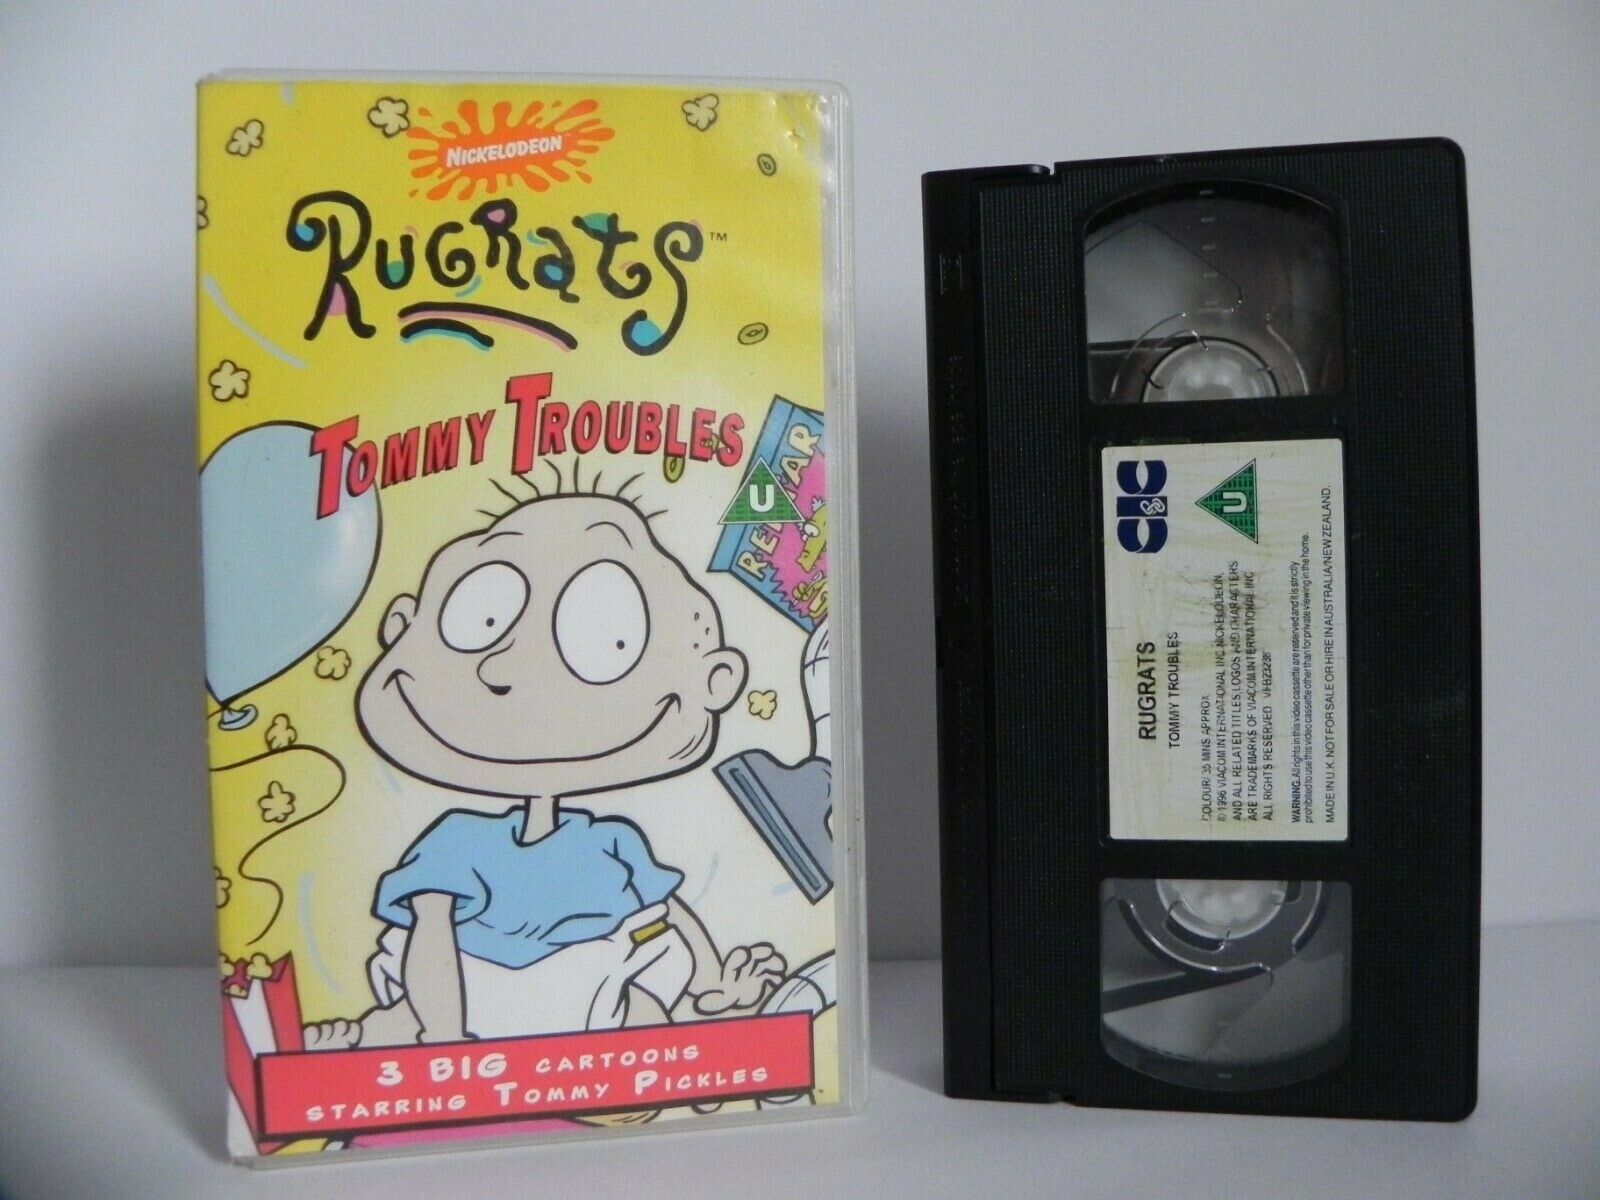 Rugrats: Tommy Troubles - 3 Big Cartoons - Animated Adventures - Kids - Pal VHS-